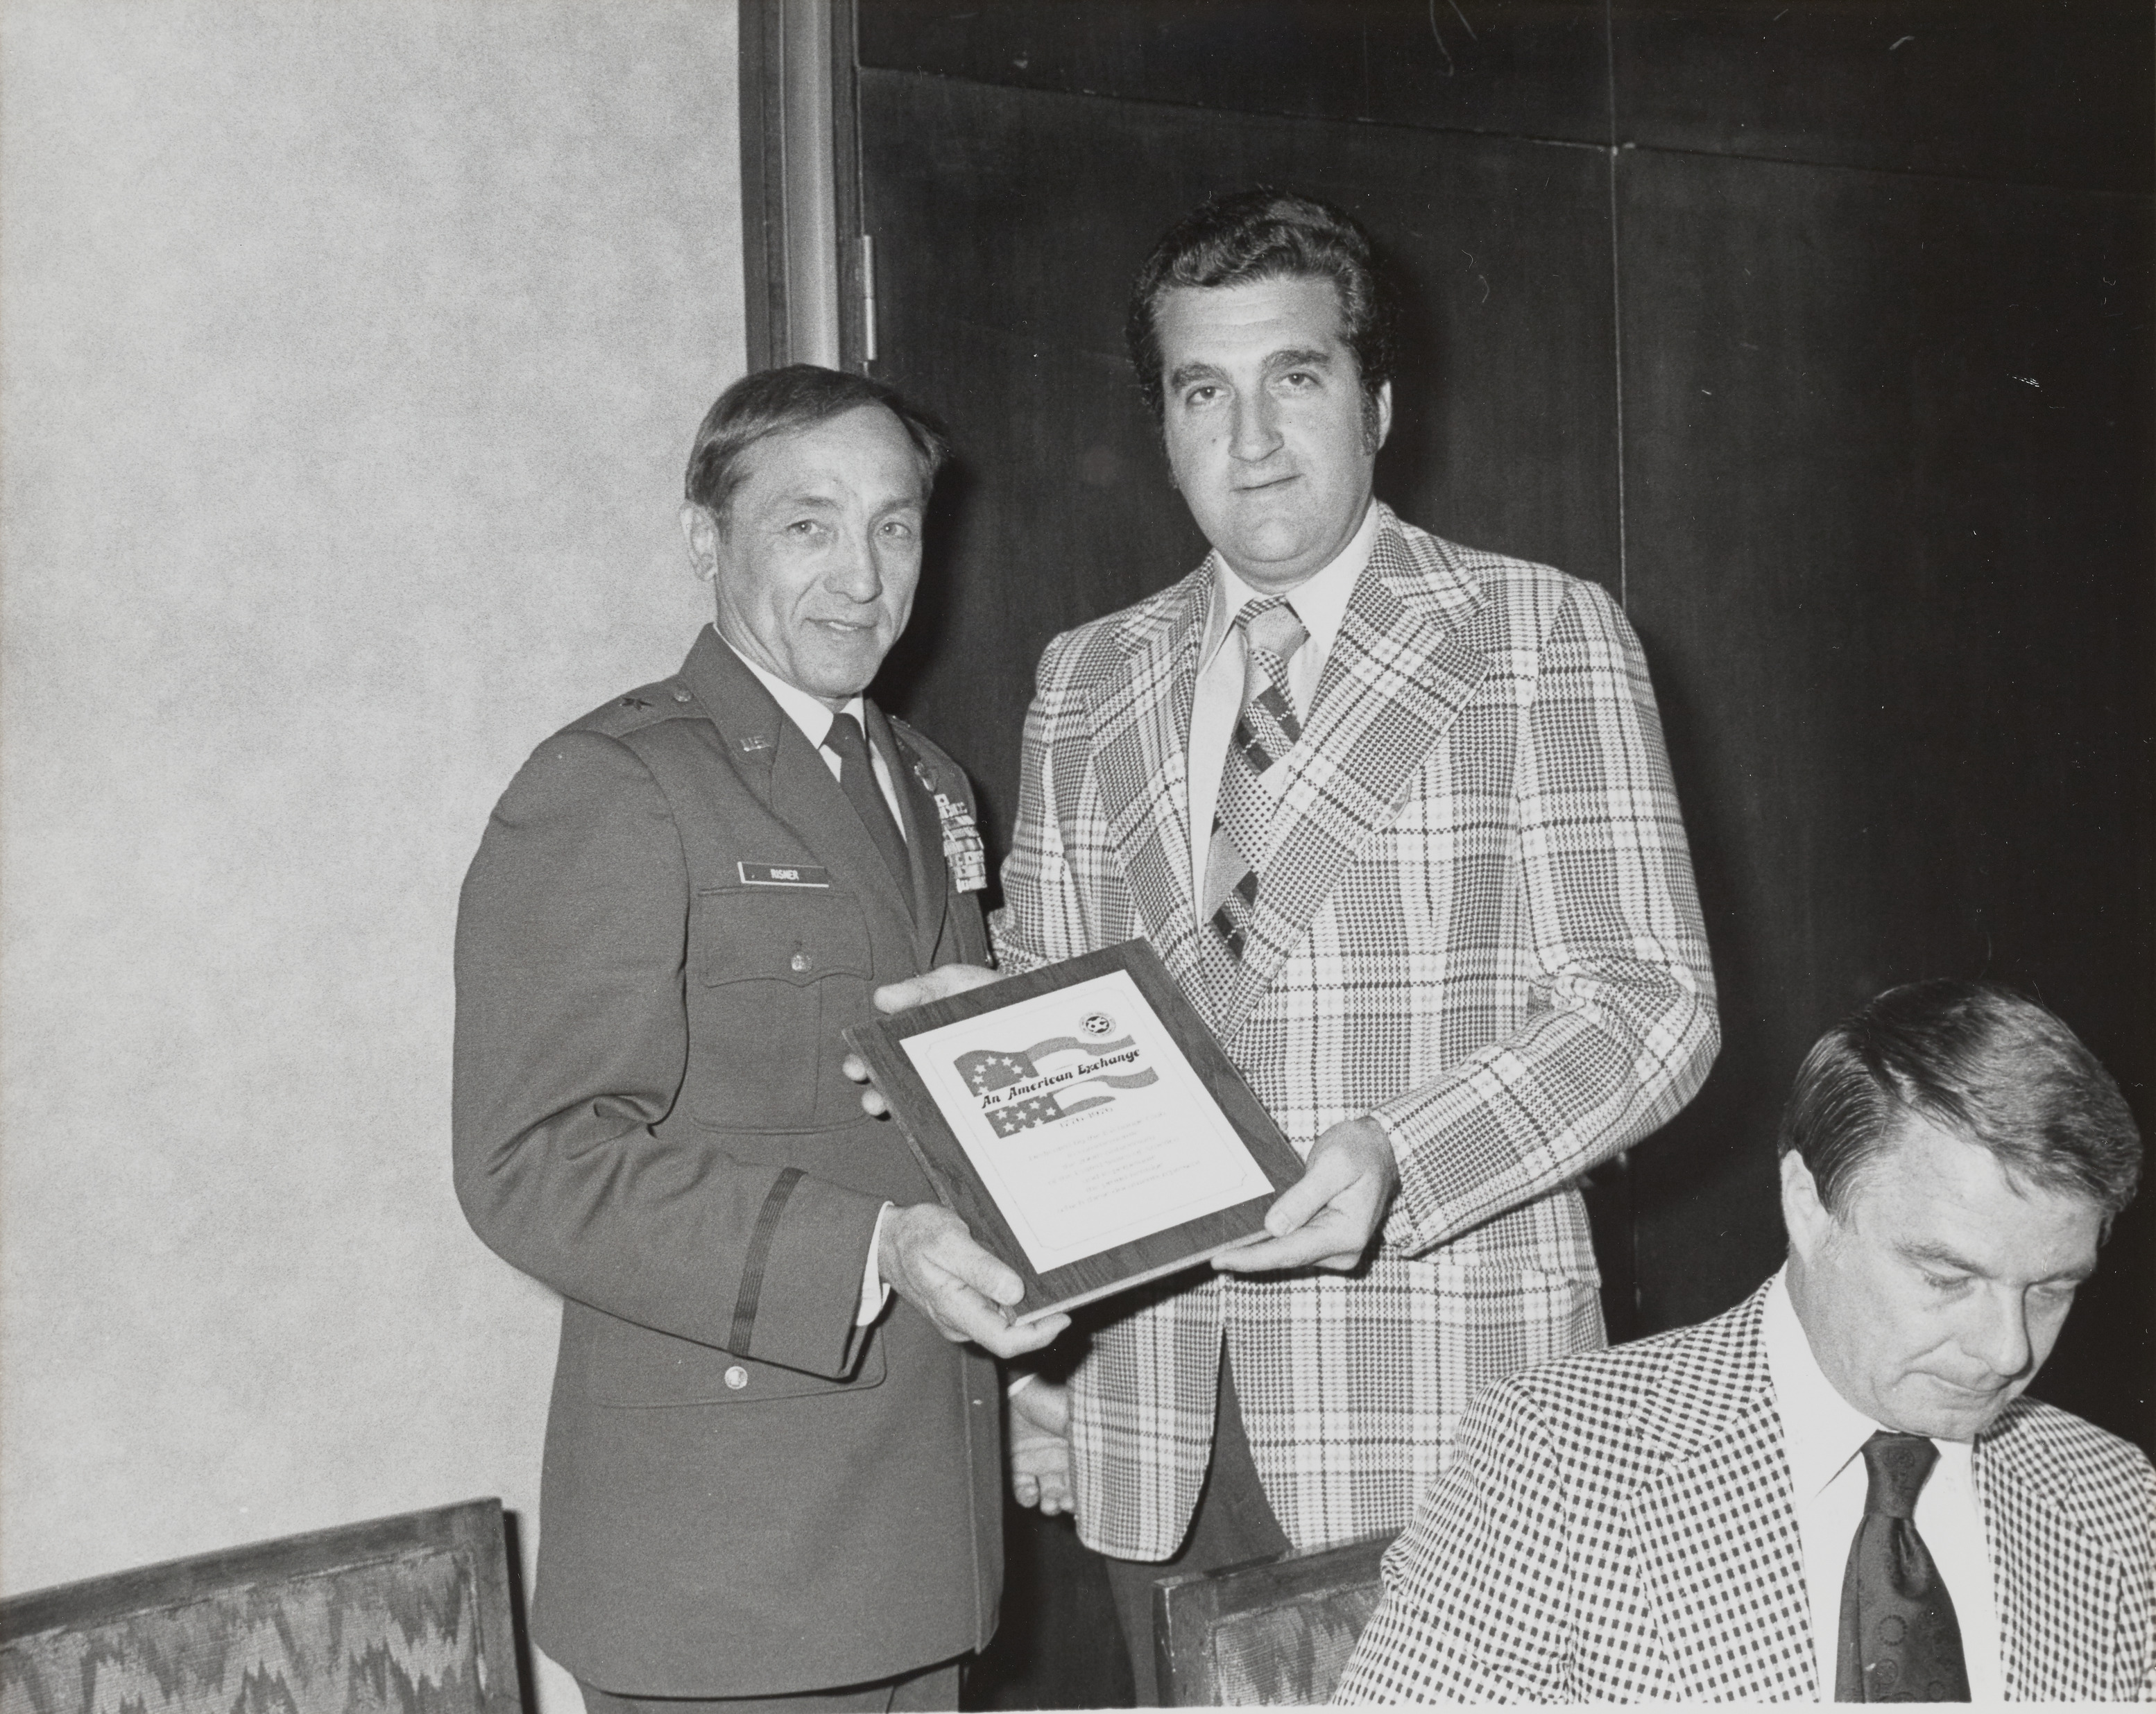 Photograph of Ron Lurie and Mr. Risher holding An American Exchange plaque